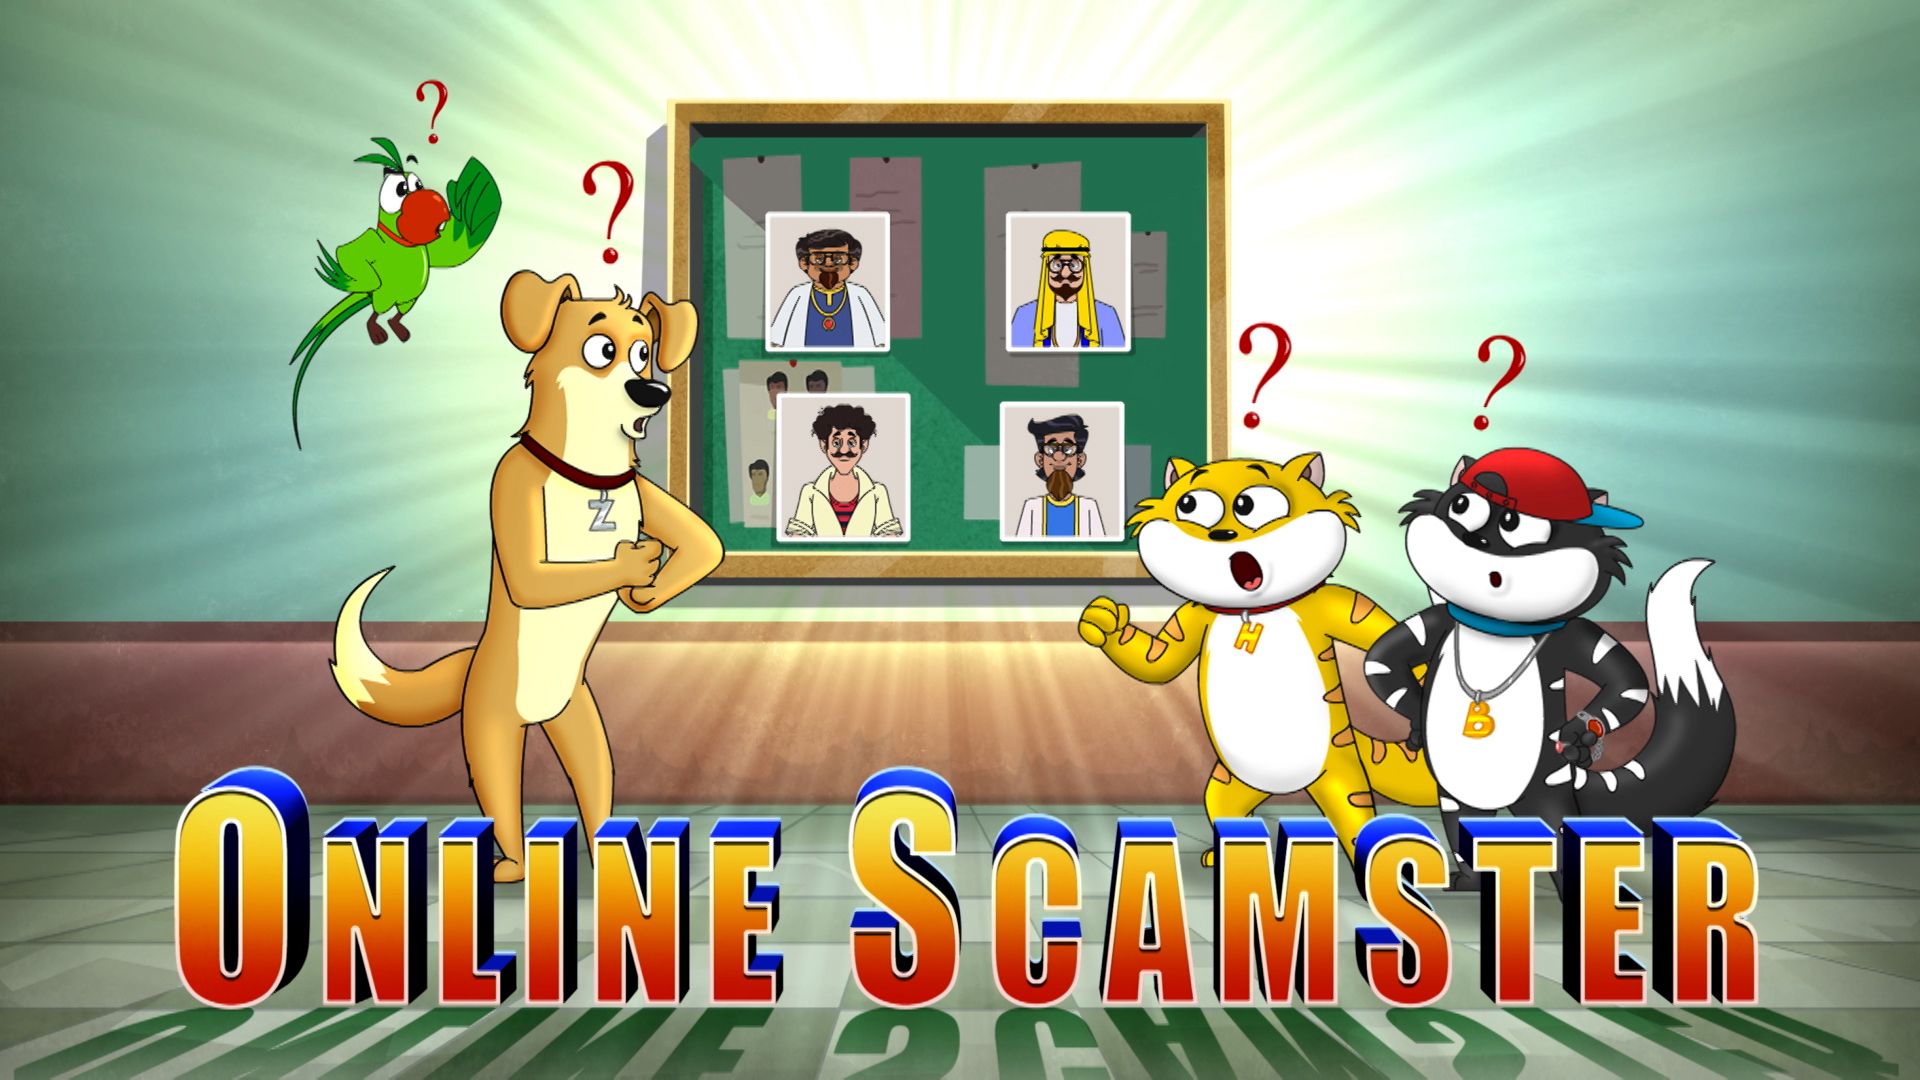 Online Scamster